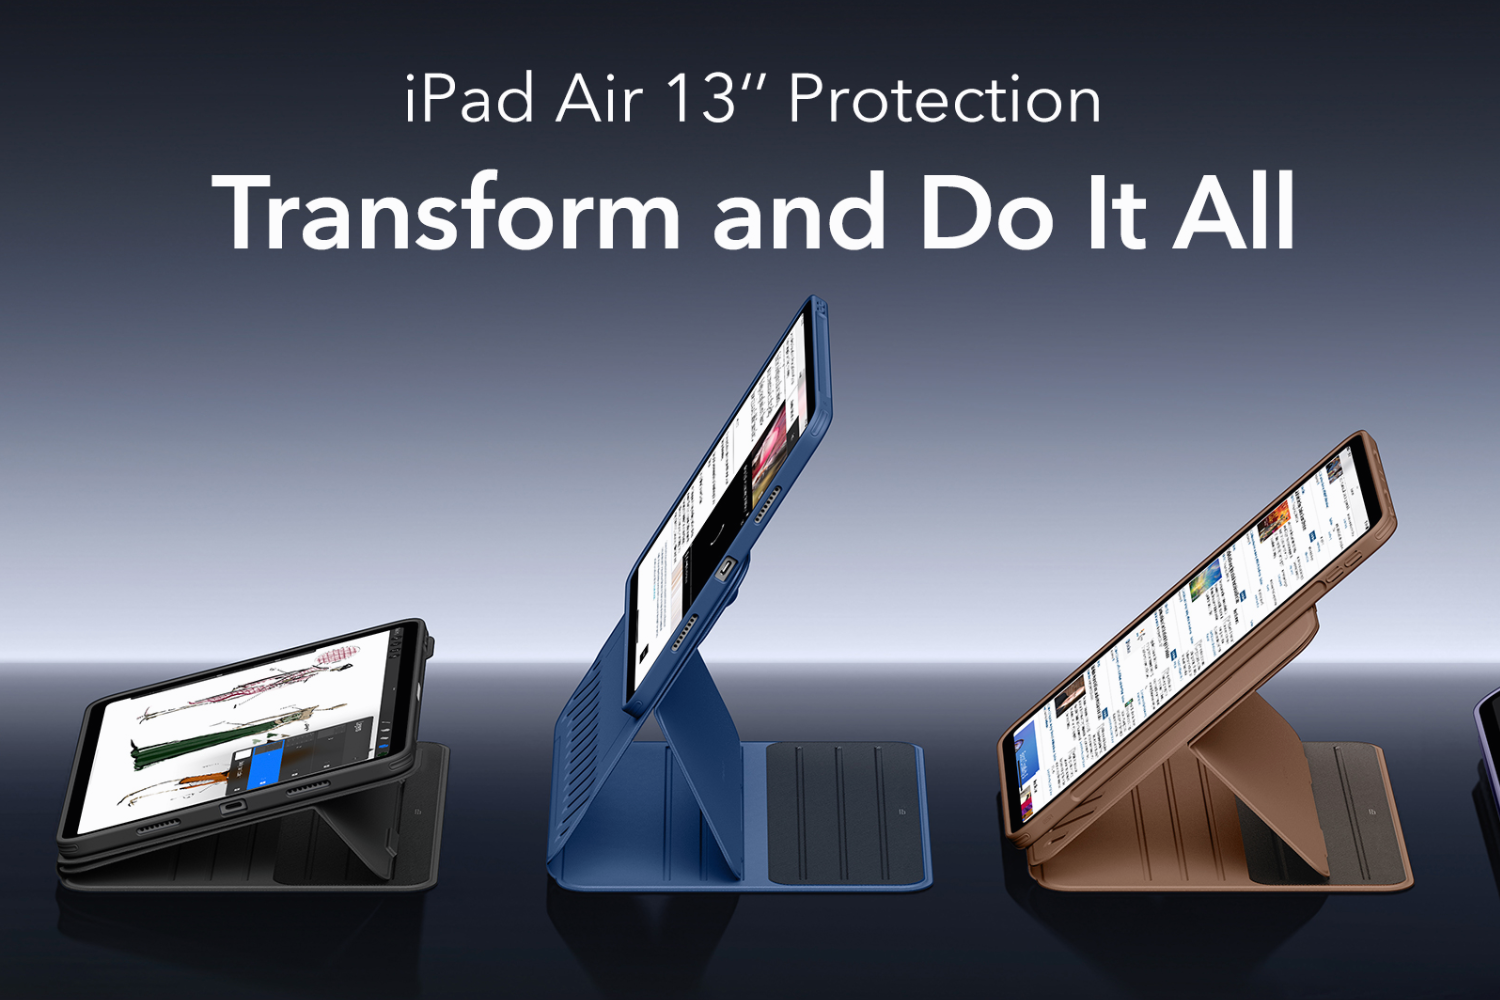 Image Credit–ESR - Case maker already offering options for Apple&#039;s alleged 12.9-inch iPad Air on Amazon